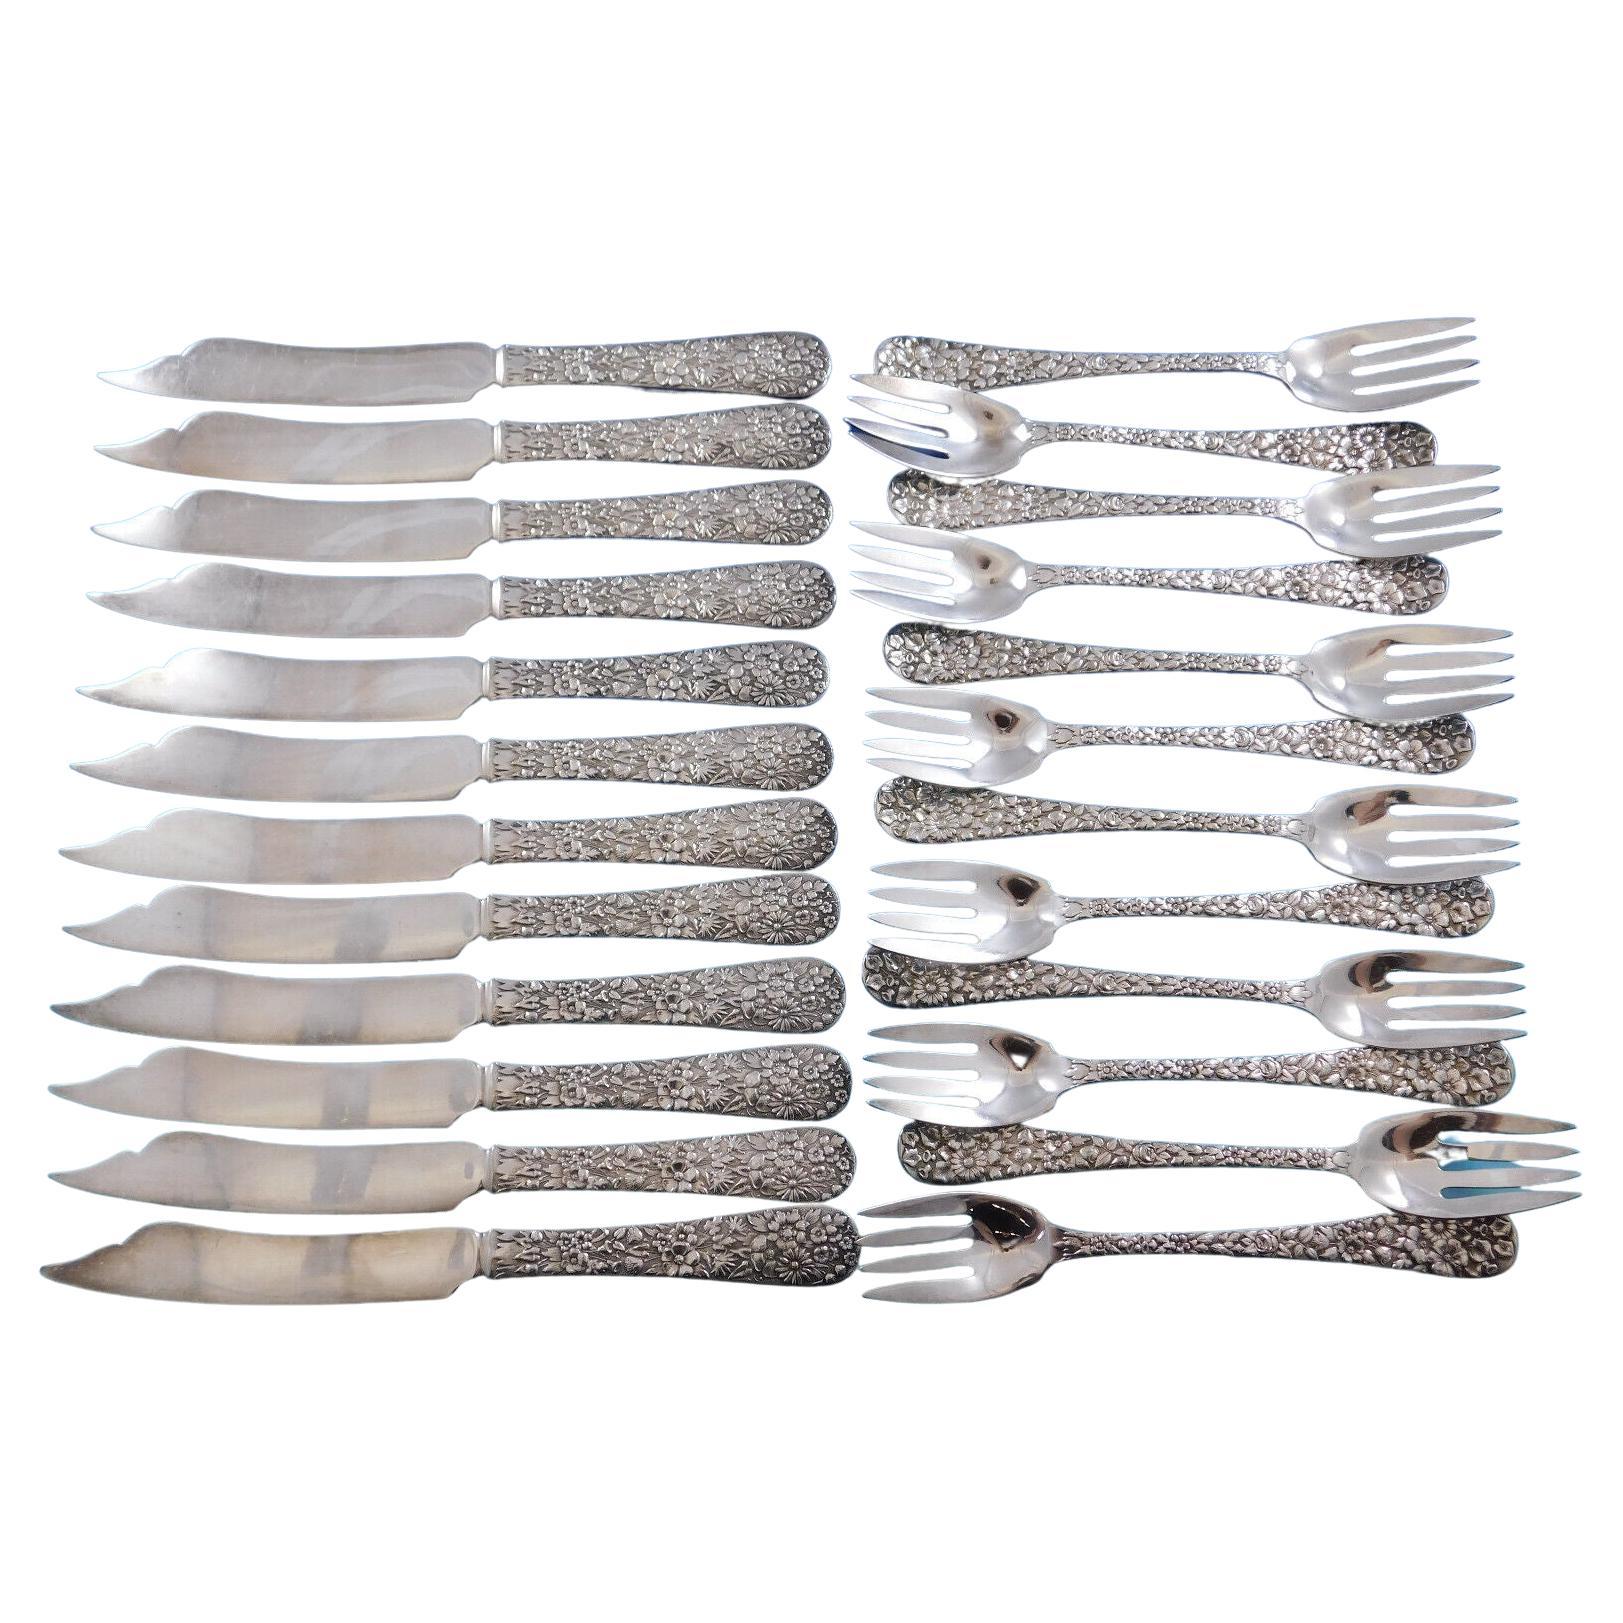 Floral by Tiffany & Co. Silverplate Individual Fish Set 24 Pieces Antique, c1884 For Sale